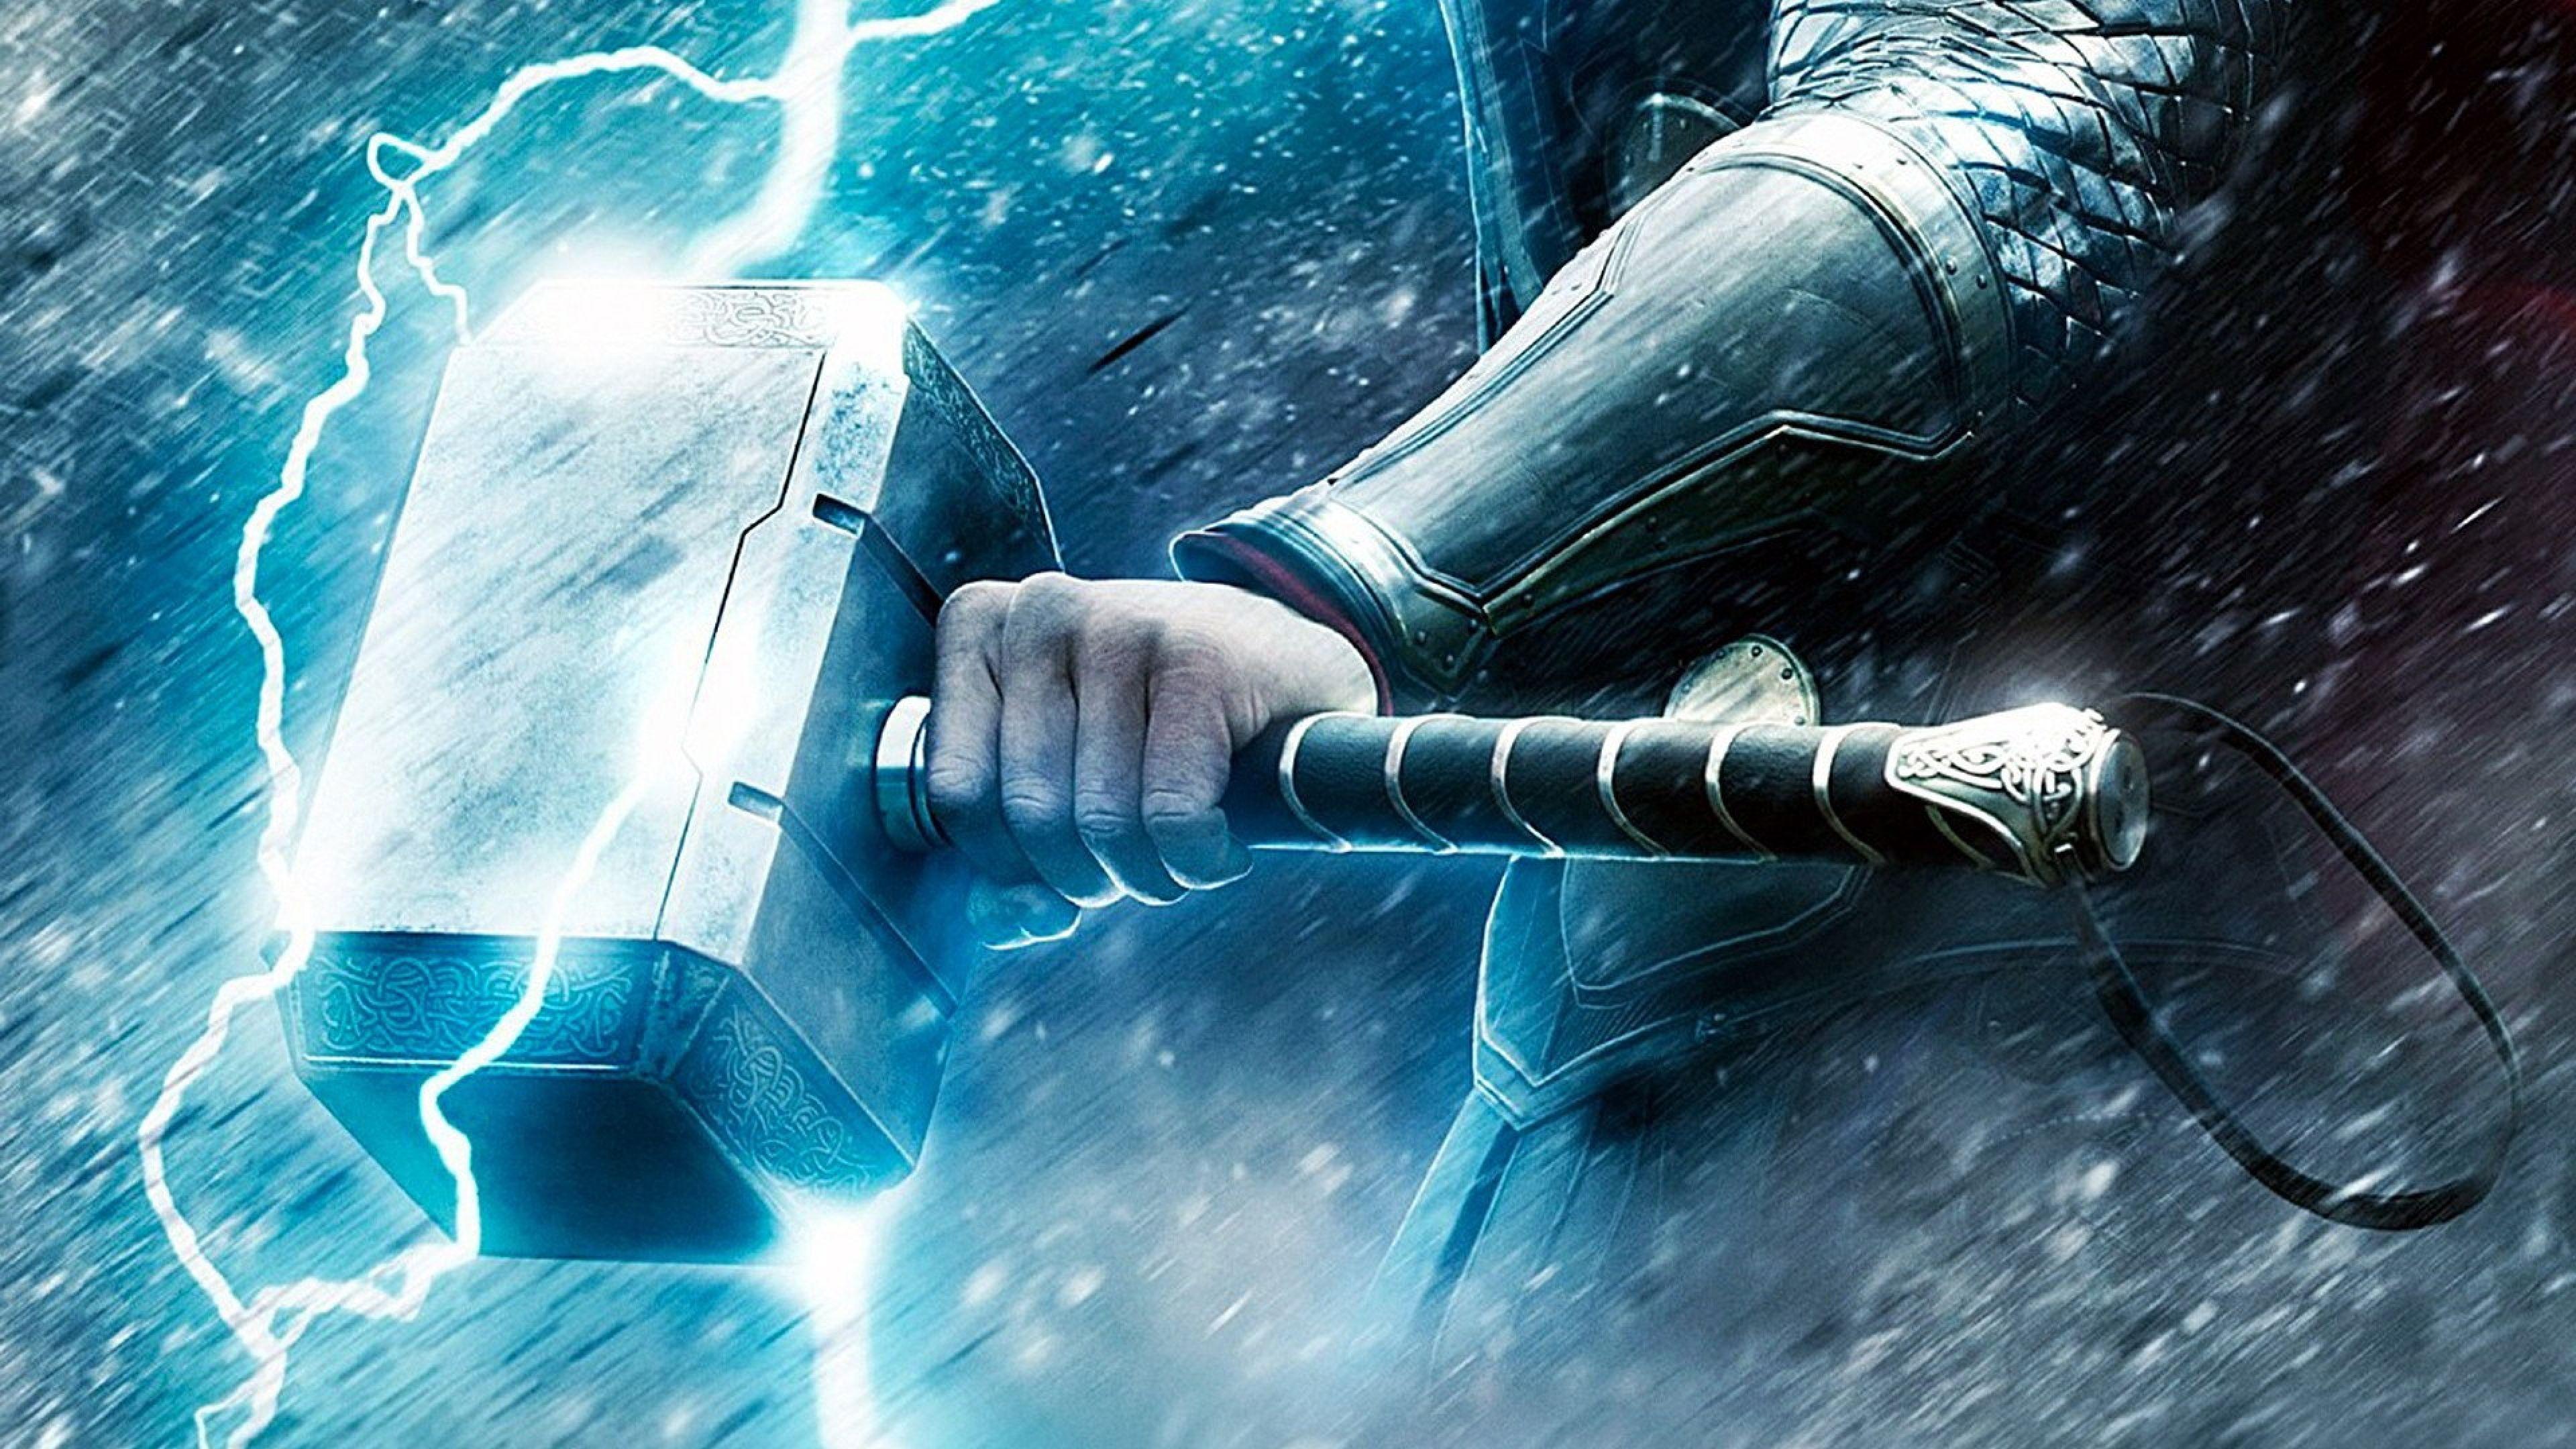  4K  Thor  Wallpapers  Top Free 4K  Thor  Backgrounds  